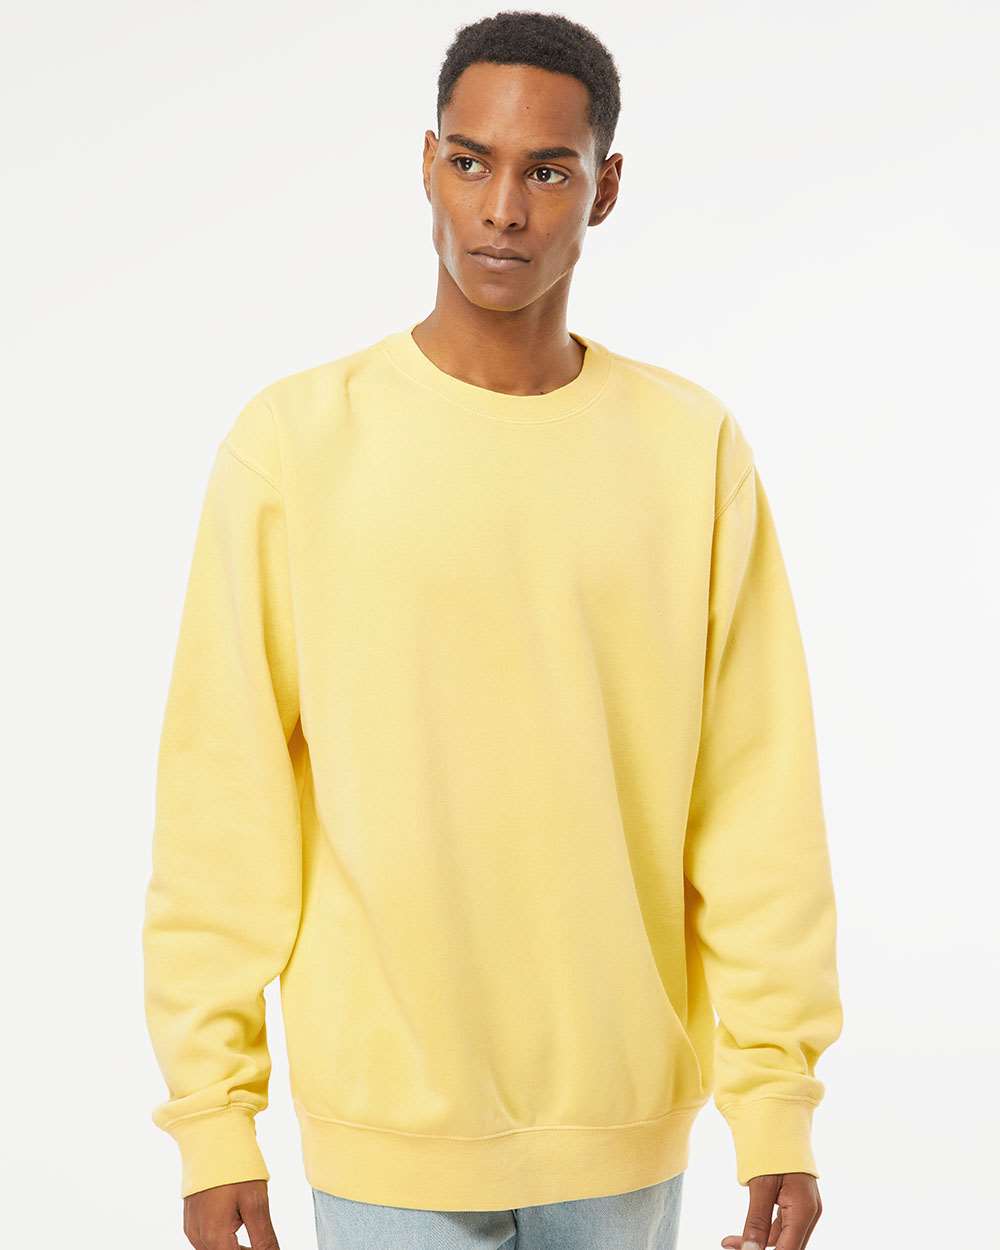 Independent Trading Co. Unisex Midweight Pigment-Dyed Crewneck Sweatshirt PRM3500 #colormdl_Pigment Yellow